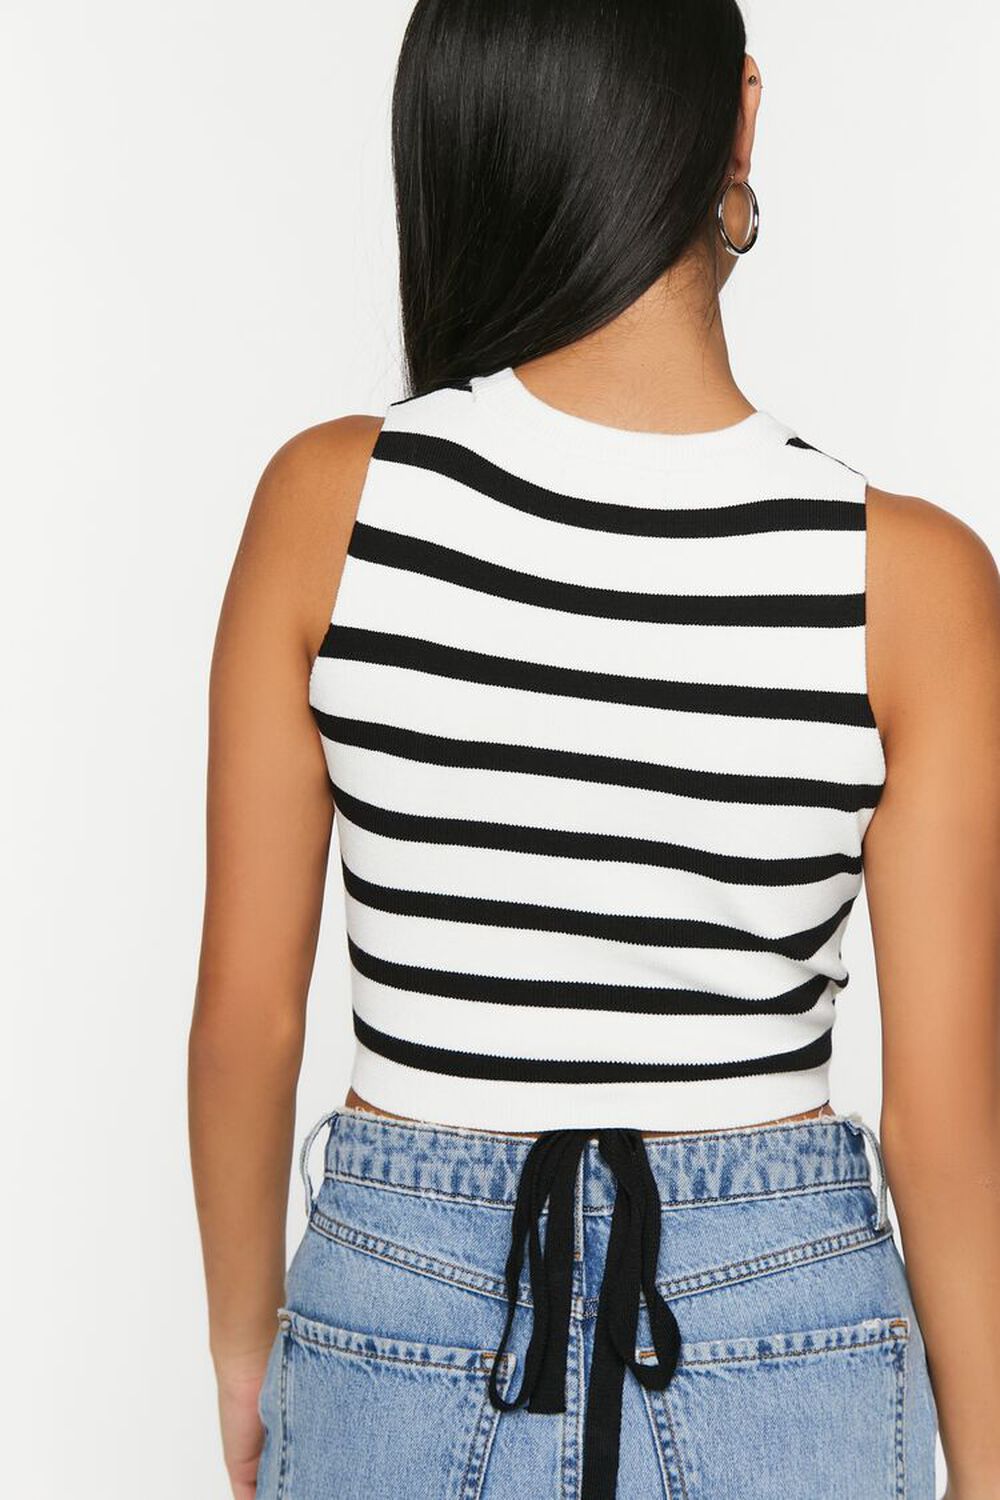 BLACK/WHITE Striped Strappy Sleeveless Crop Top, image 3